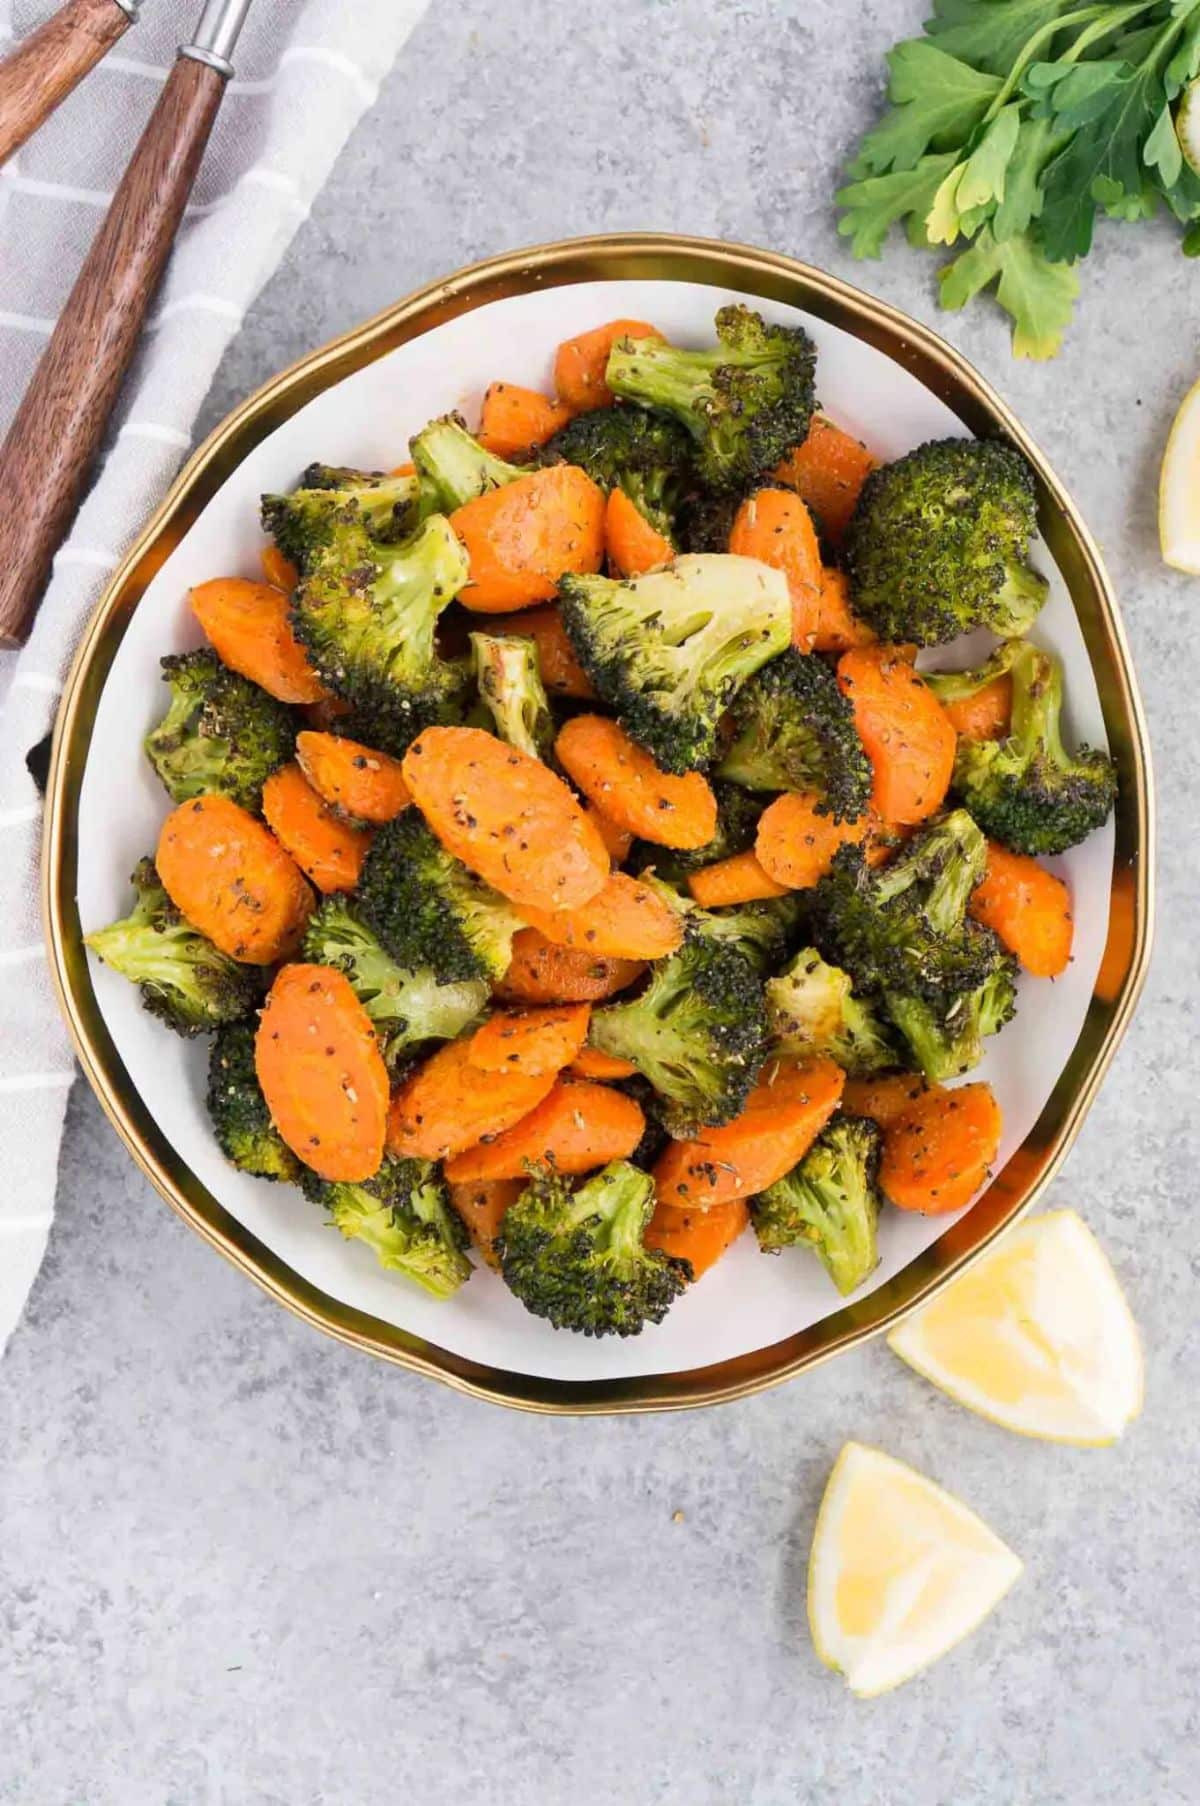 Tasteful Roasted Broccoli and Carrots in a bowl.